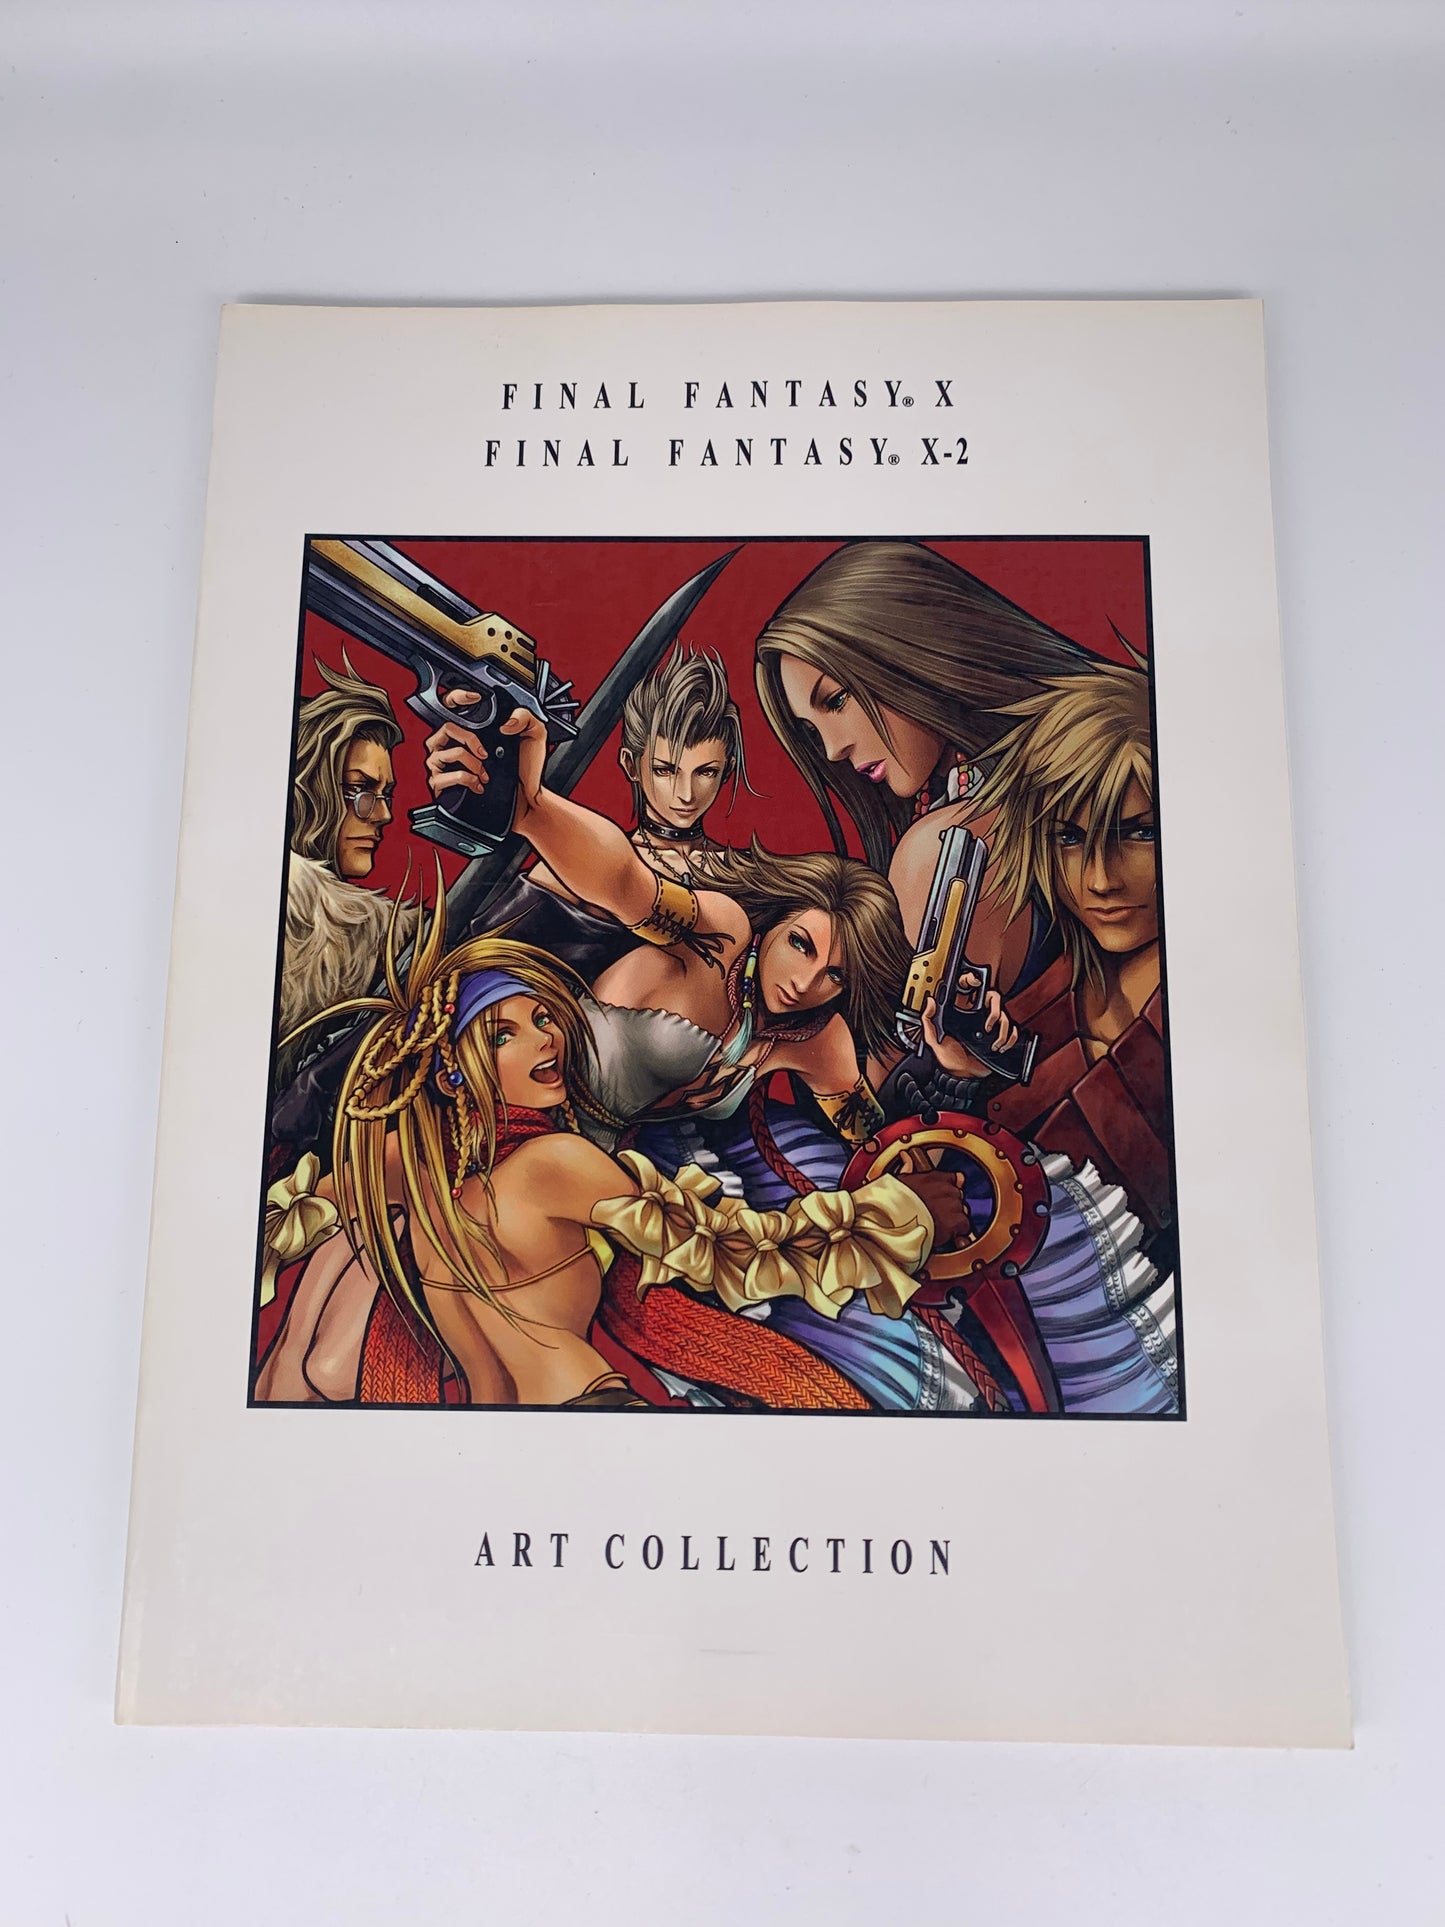 FiNAL FANTASY X-2 STRATEGY GUiDE BRADYGAMES HARDCOVER LiMiTED COLLECTORS EDiTiON